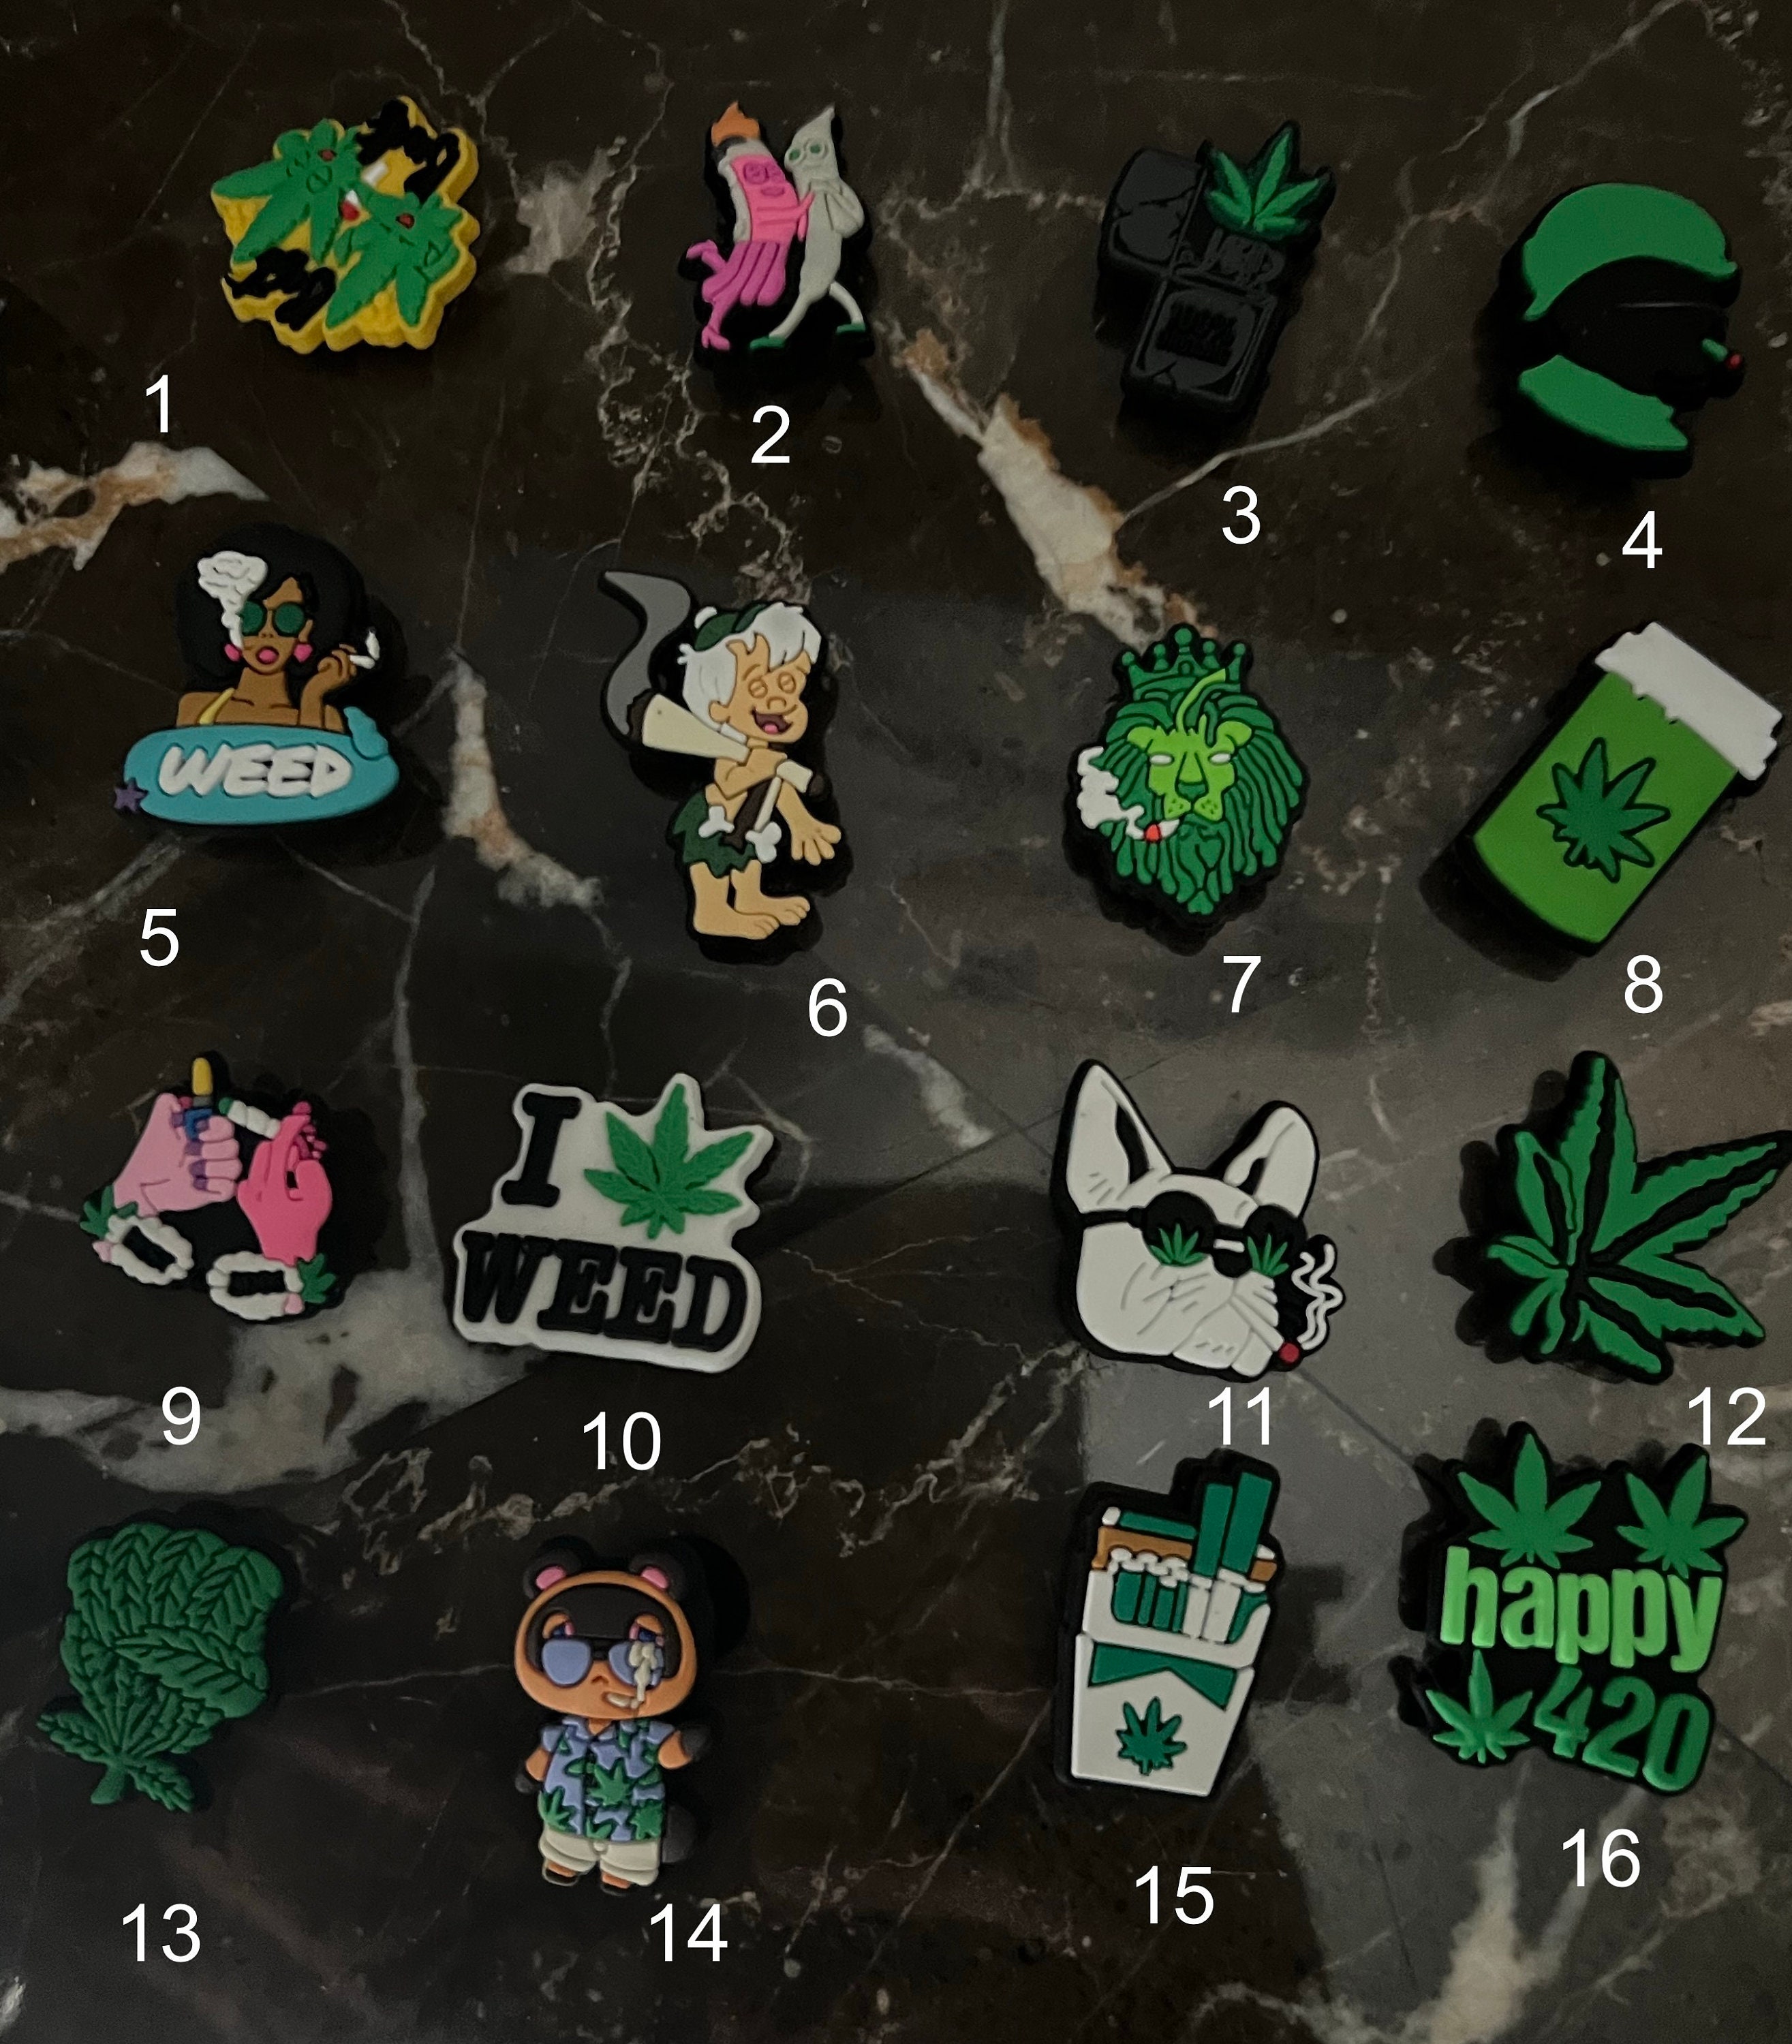 Custom Cannabis Crocs Charms - Unique Dispensary Merchandise in the USA –  ROLL YOUR OWN PAPERS.COM